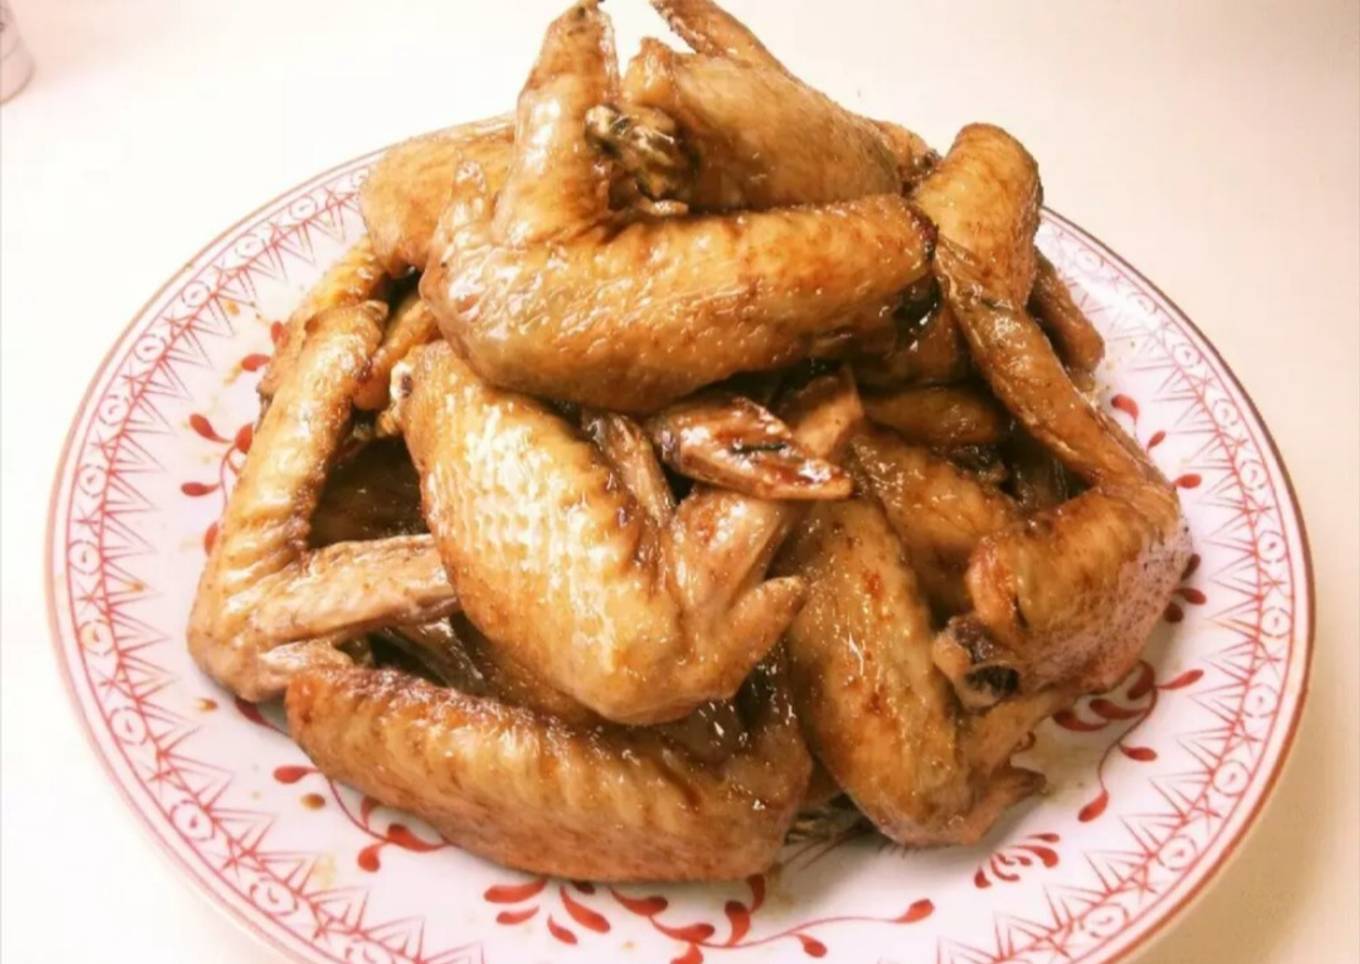 My mother's fried chicken wings